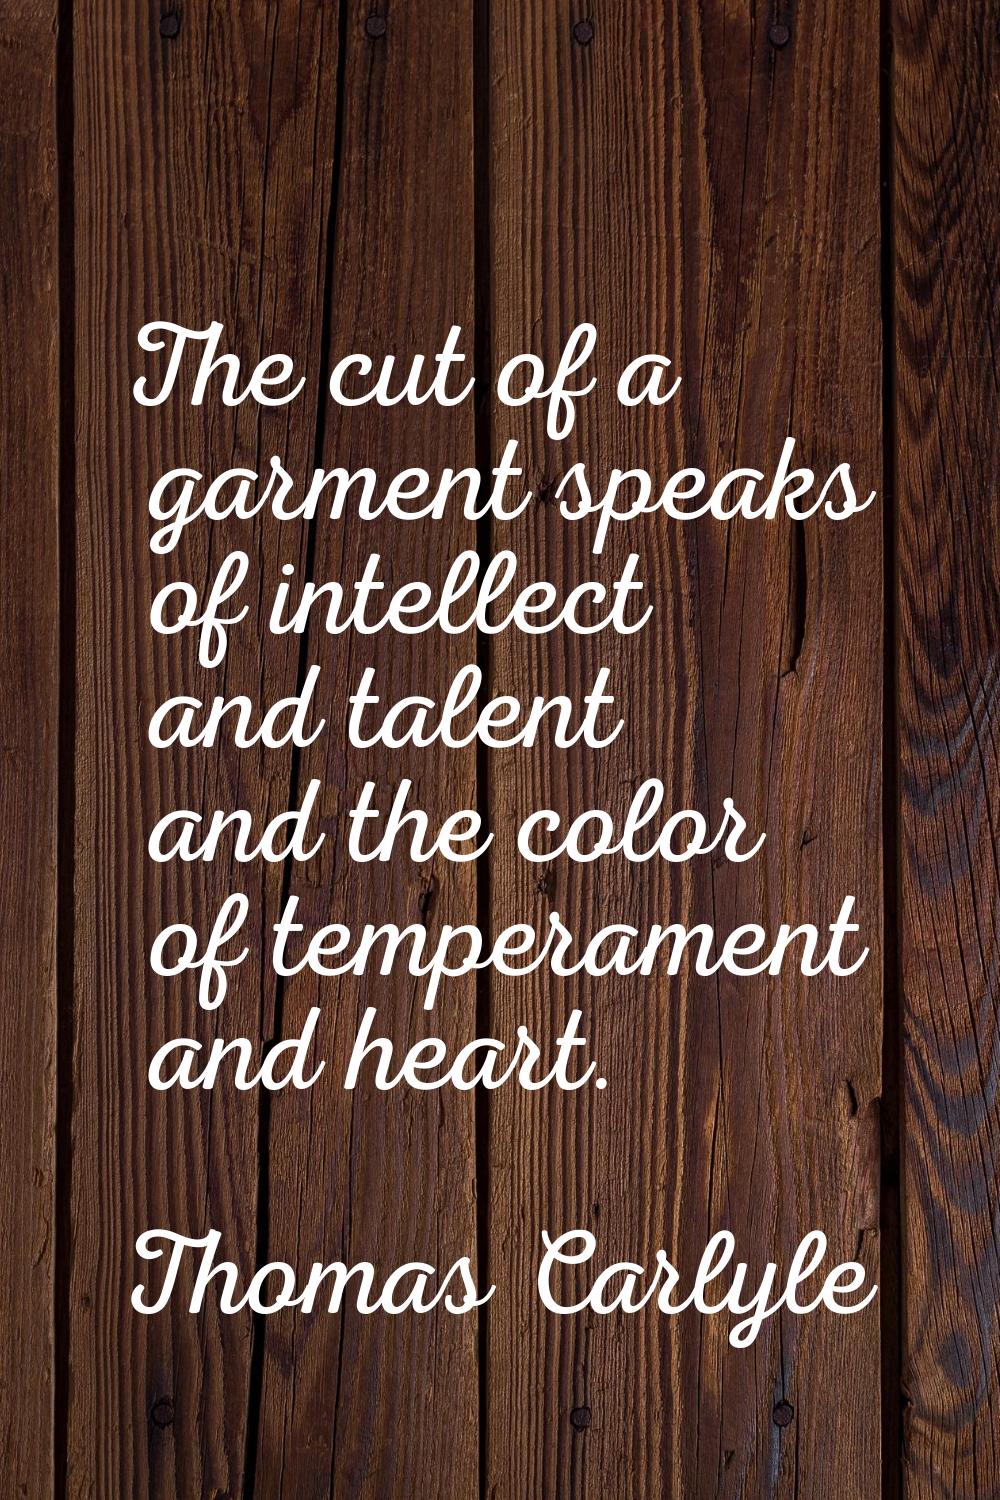 The cut of a garment speaks of intellect and talent and the color of temperament and heart.